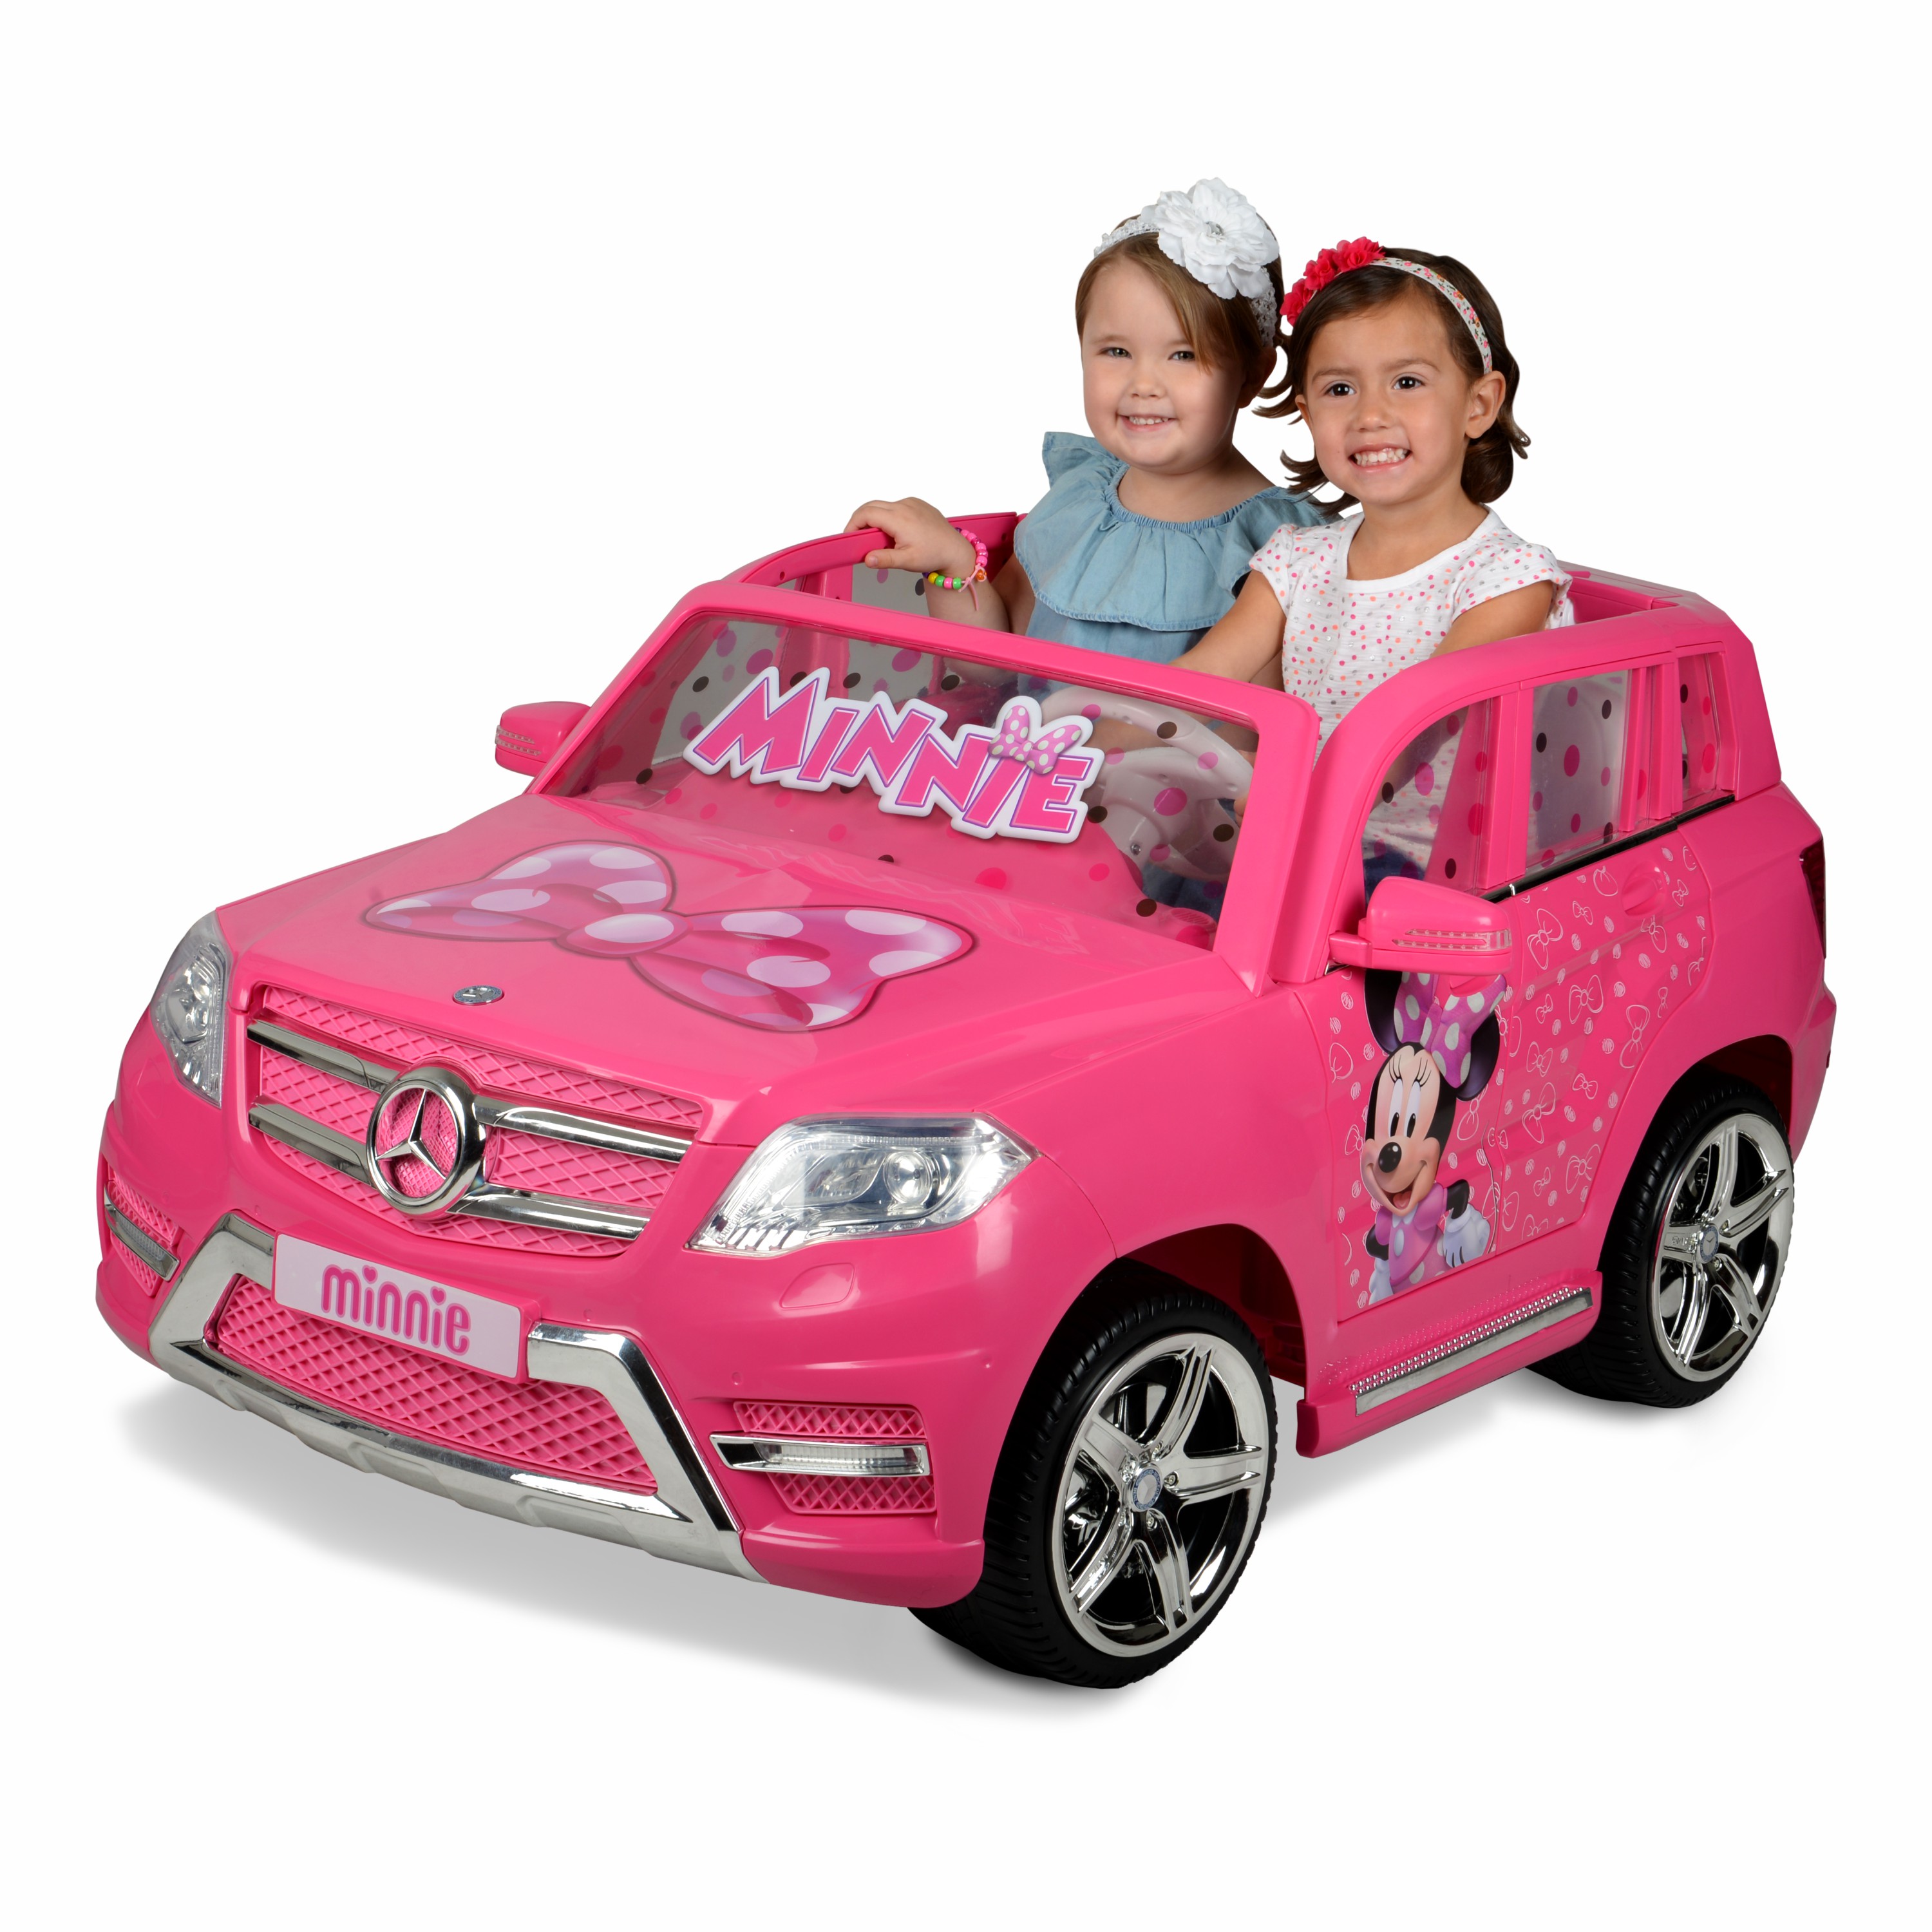 12 Volt Minnie Mouse Mercedes Battery Powered Ride On - Your little ones will ride in Luxury! - image 1 of 6